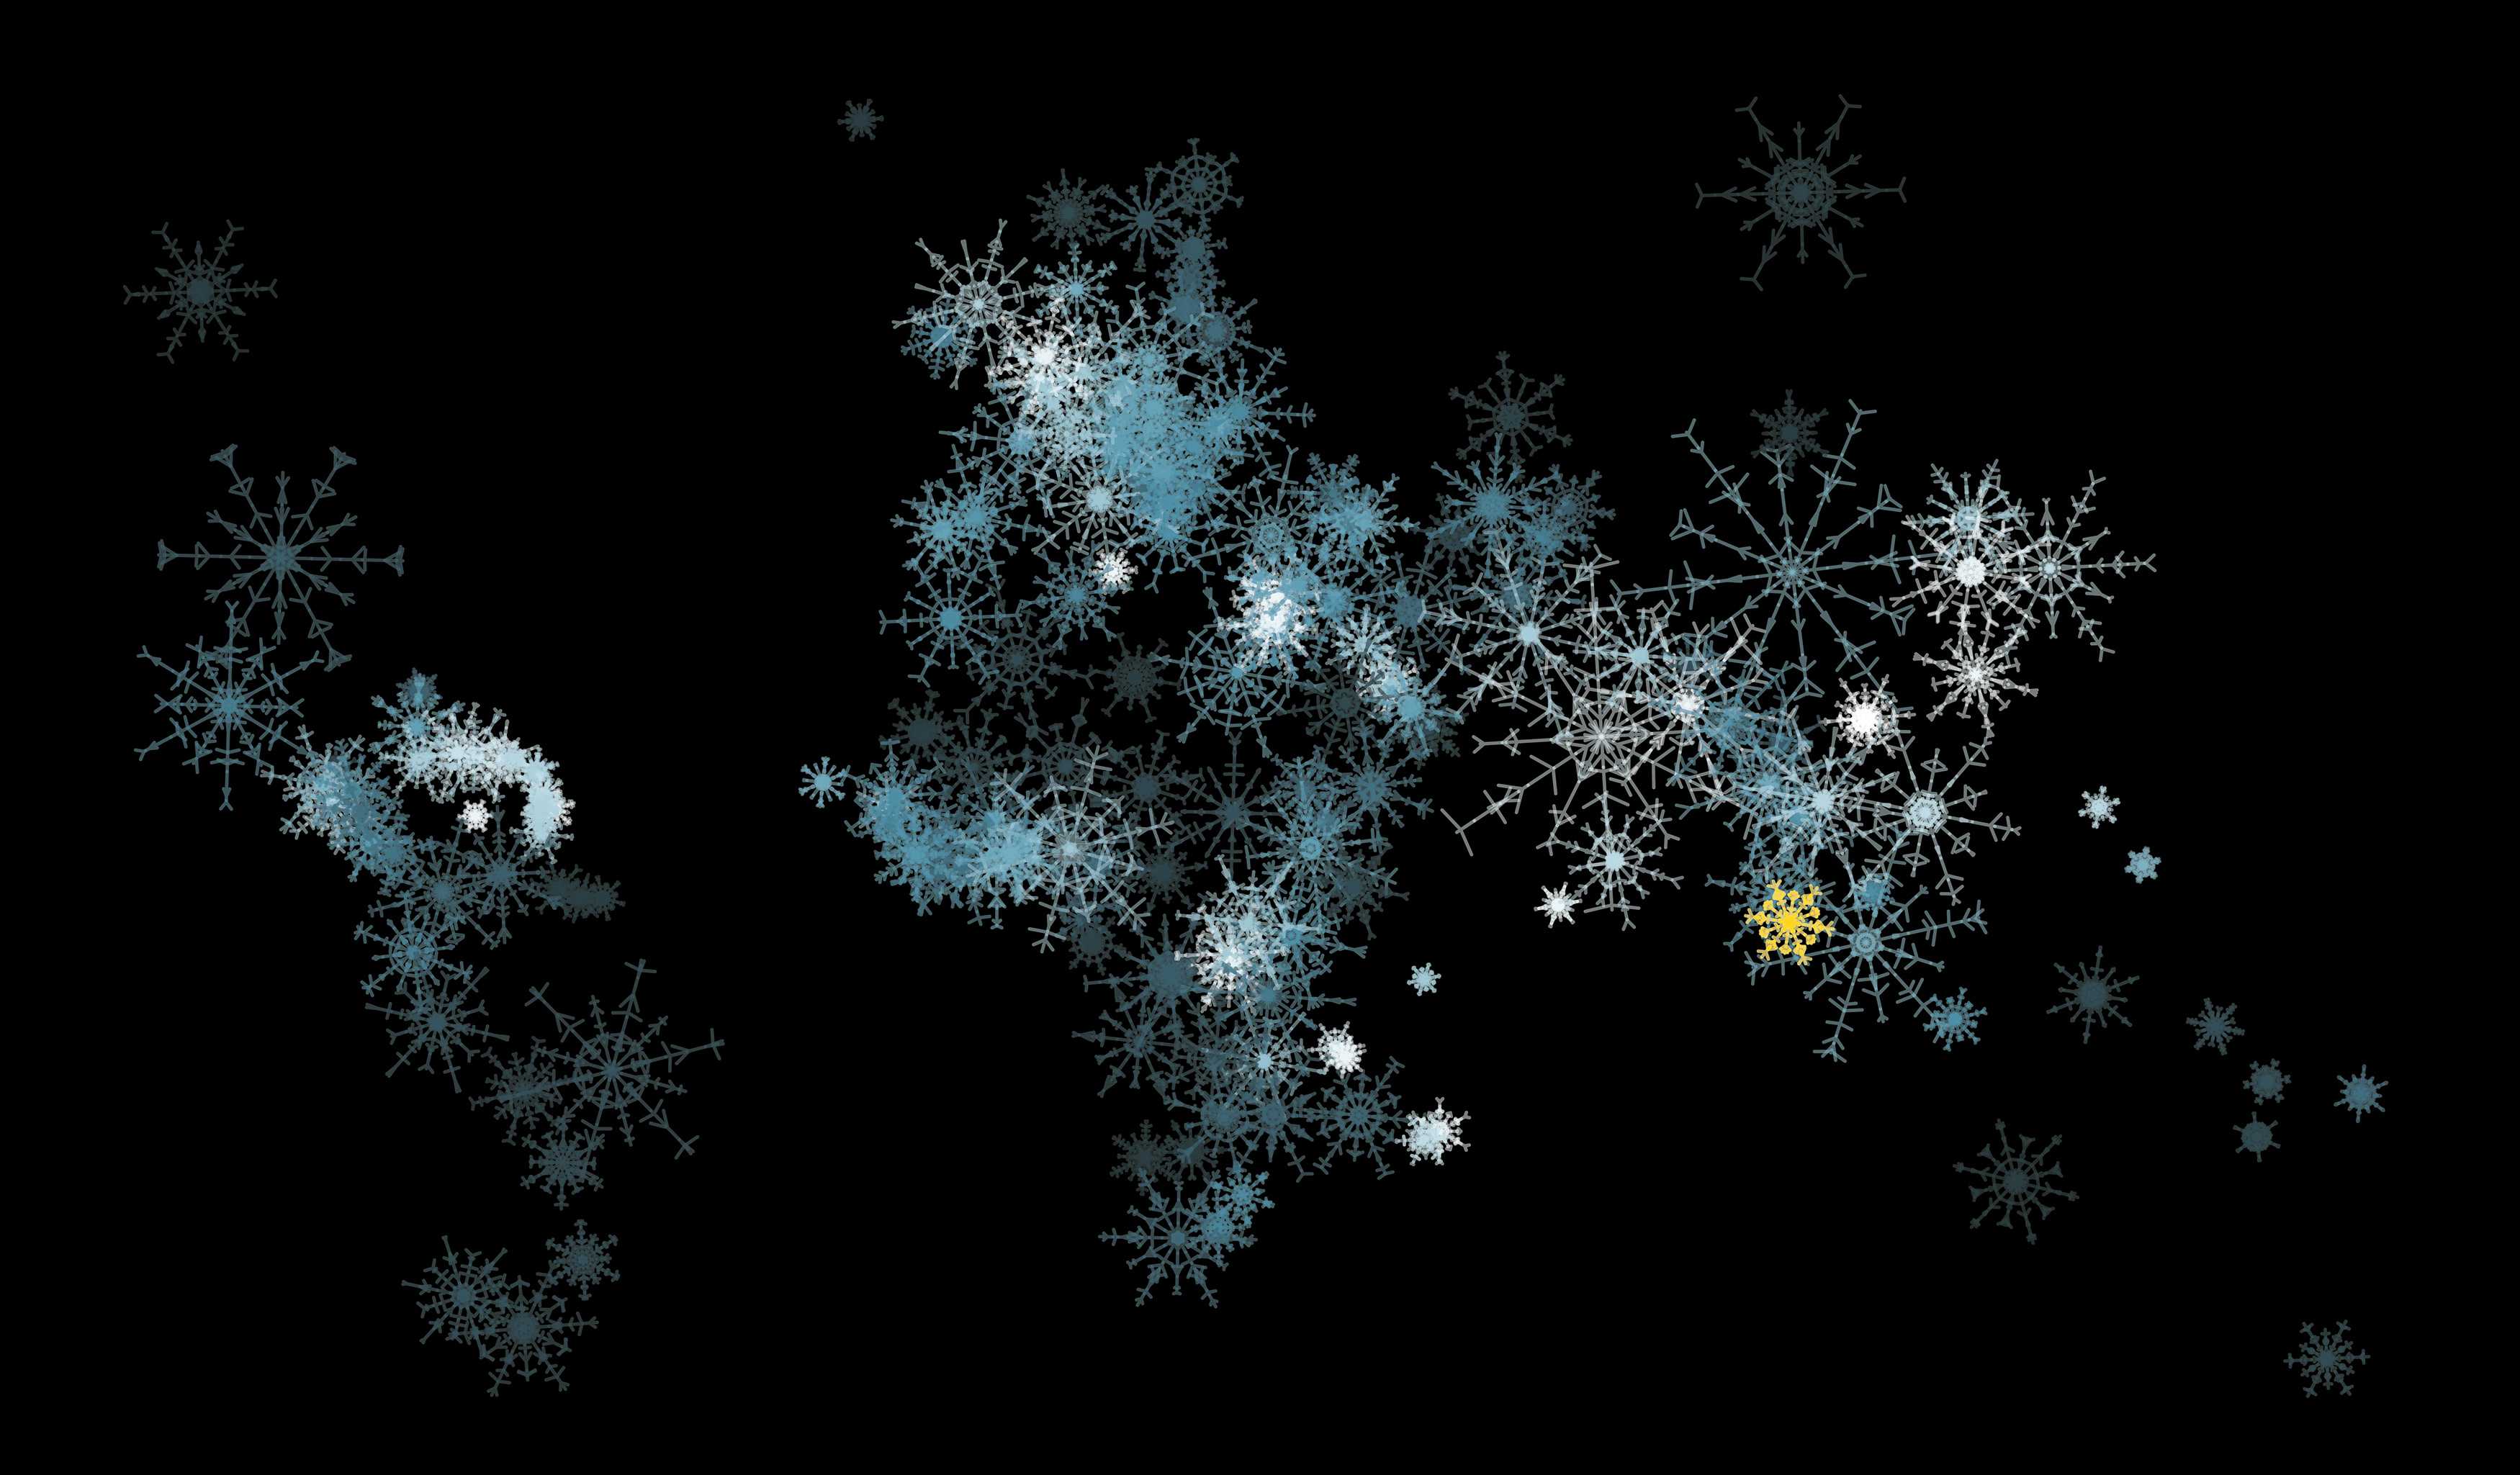 All countries of the world, displayed with snow flakes